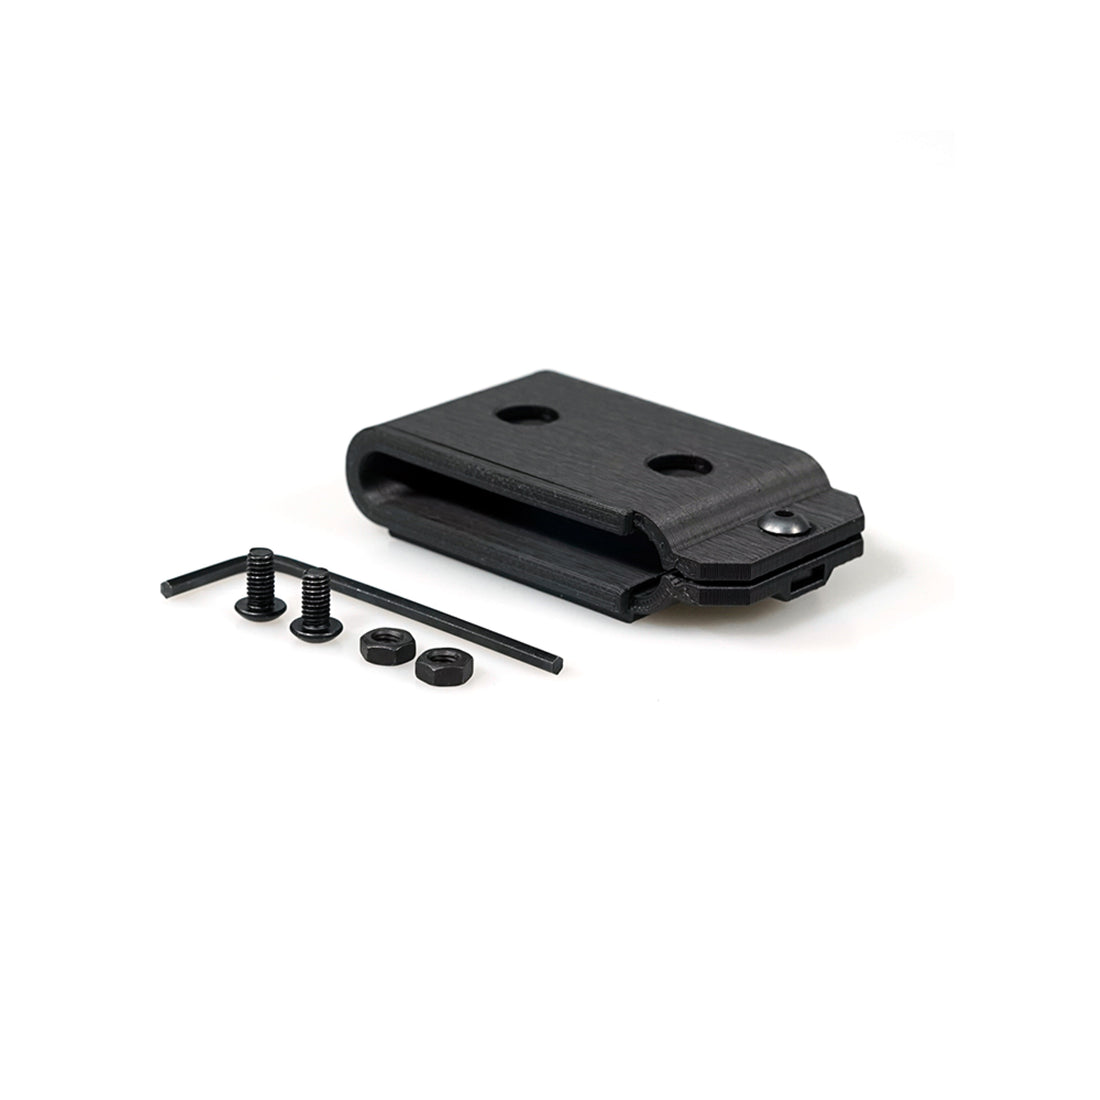 SSD Holder for PK1 Stands (Compatible with Samsung T5 / T7)